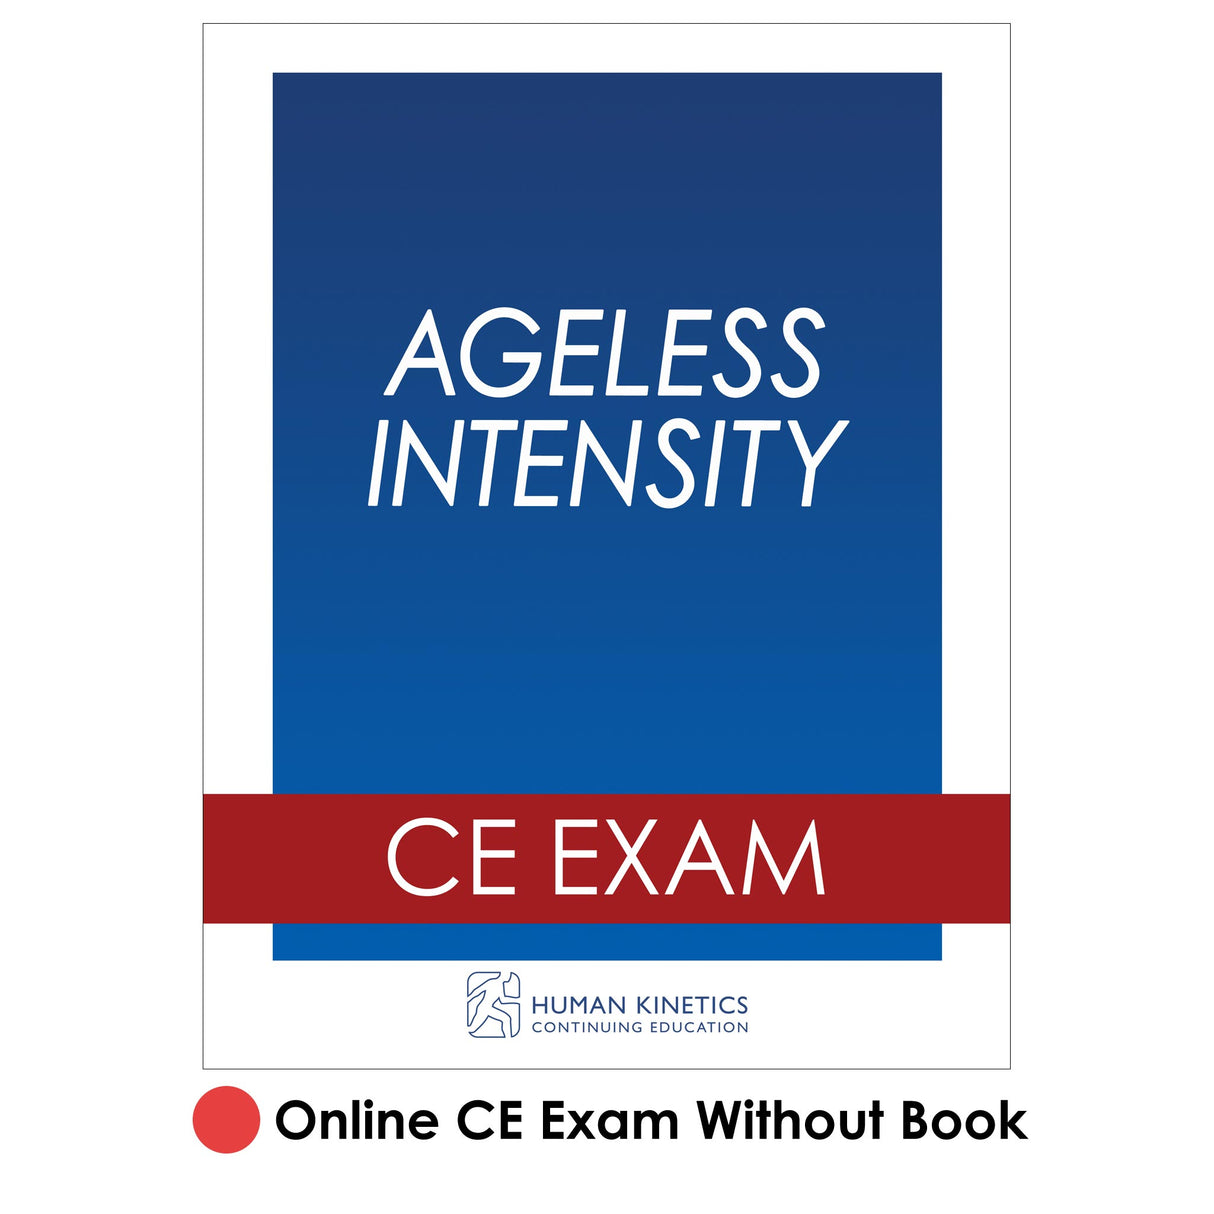 Ageless Intensity Online CE Exam Without Book